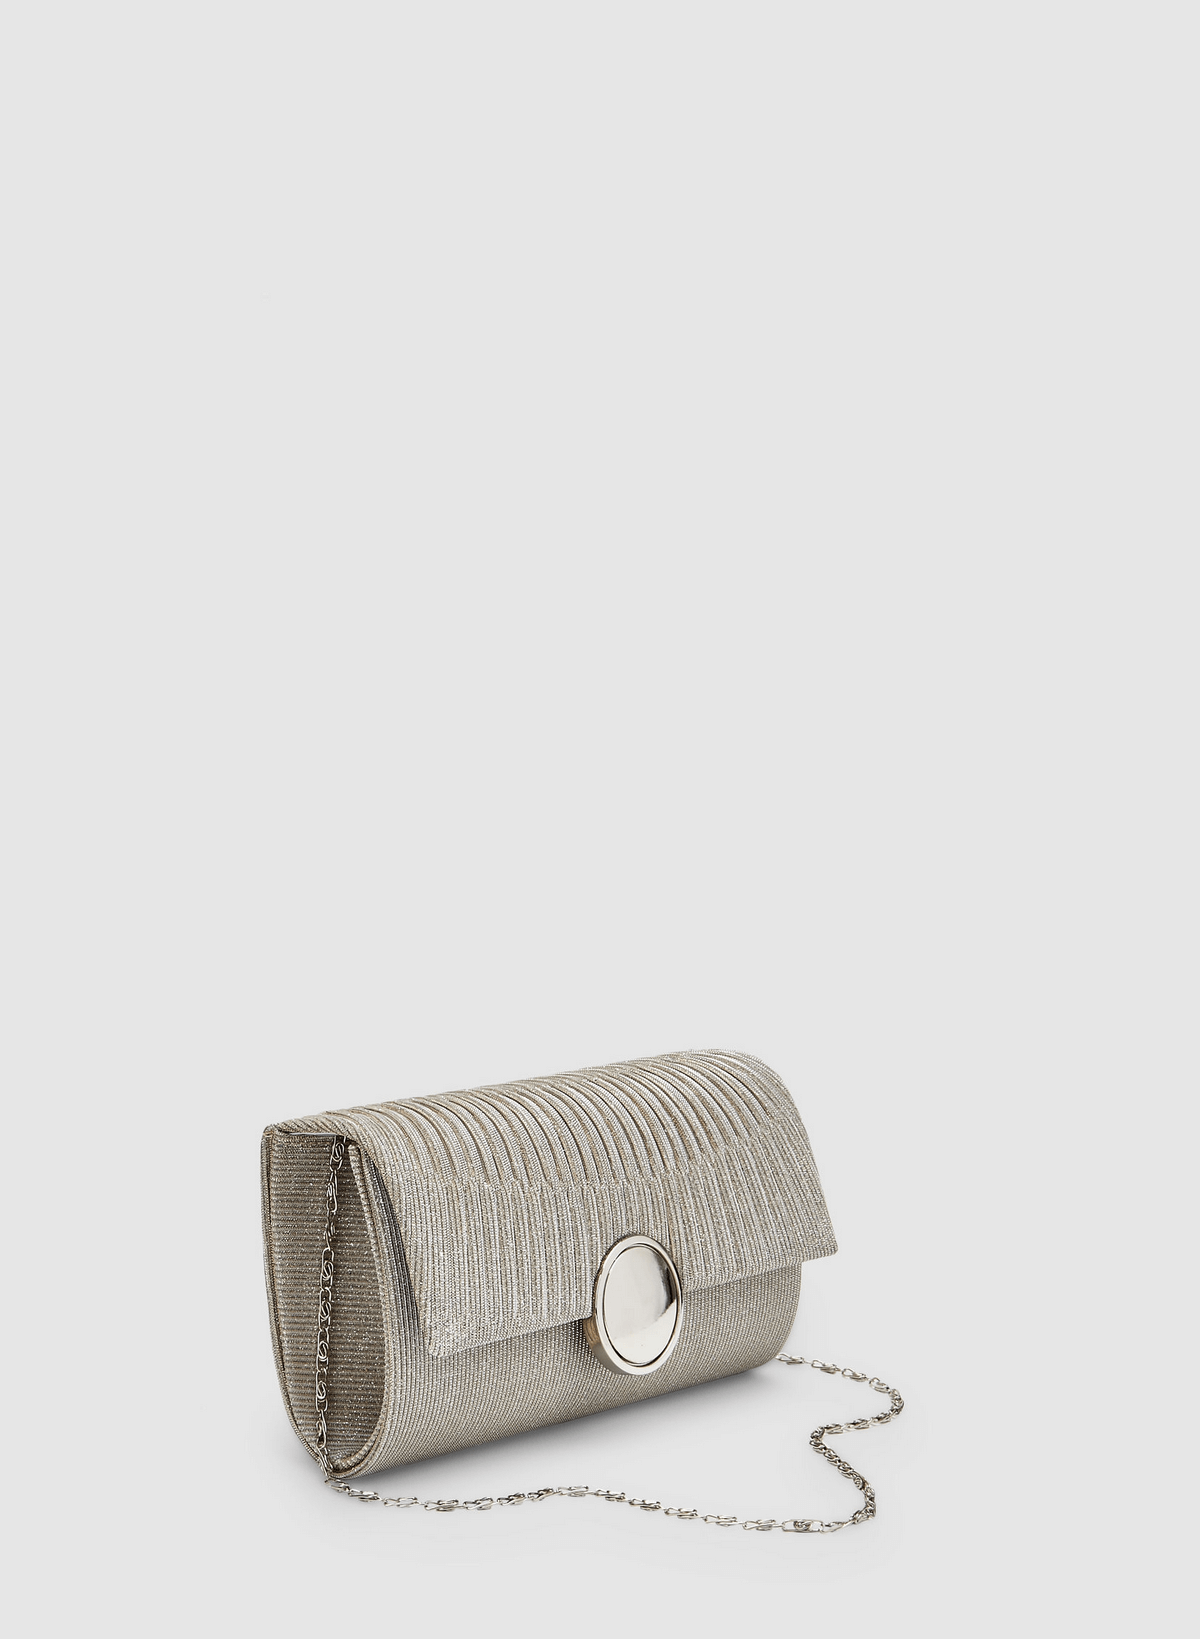 Accessories - Pleated Flapover Clutch - Laura